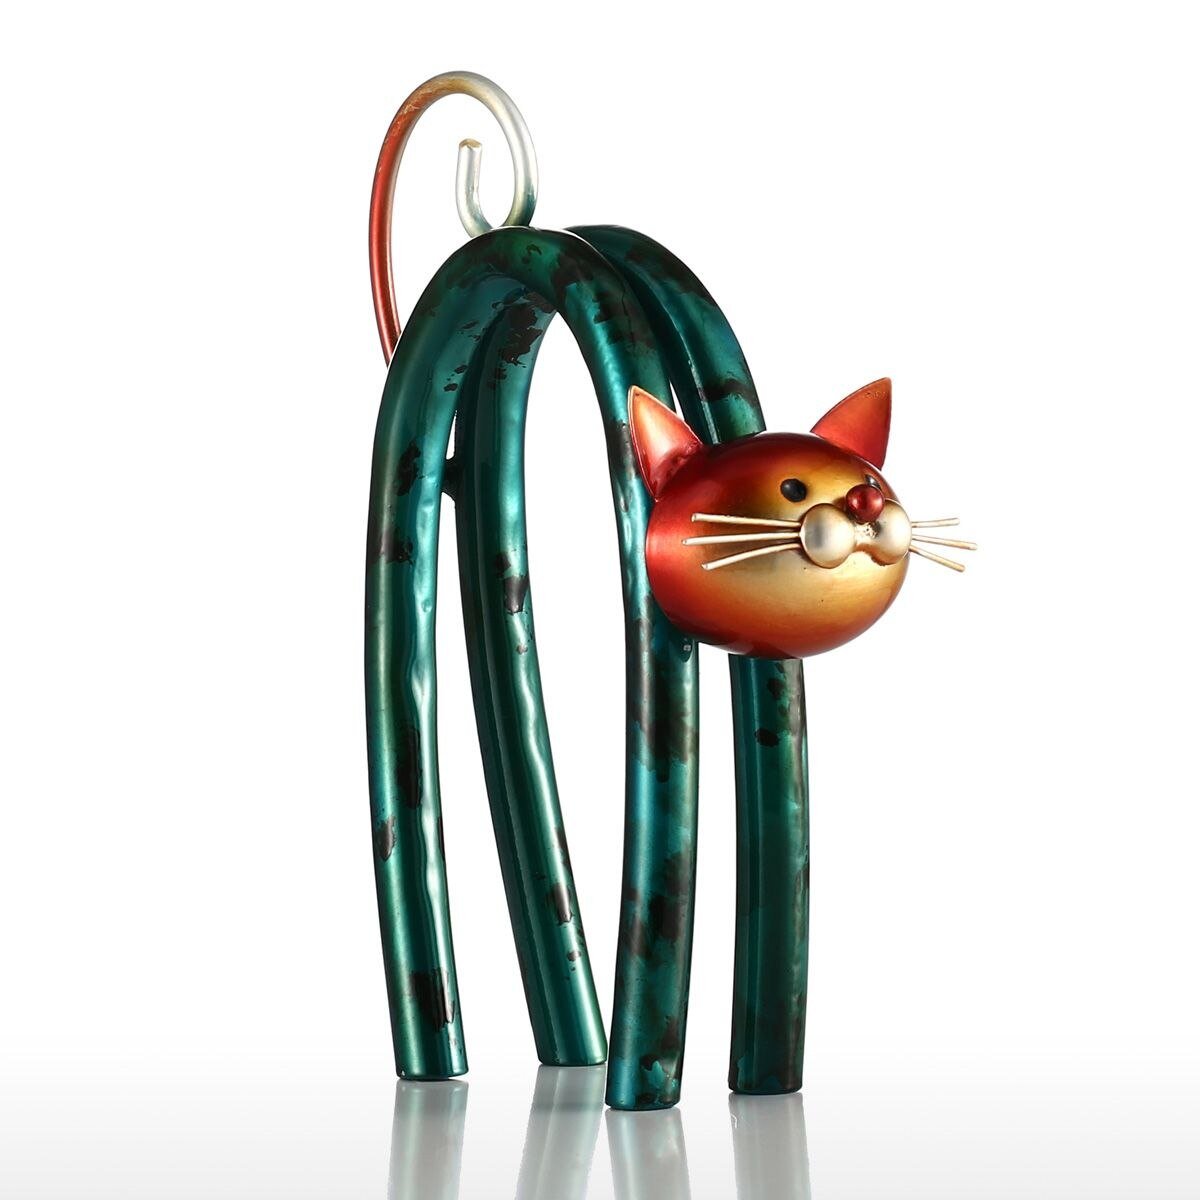 the cat arch sculpture made fro metal, for creative people and cat lovers